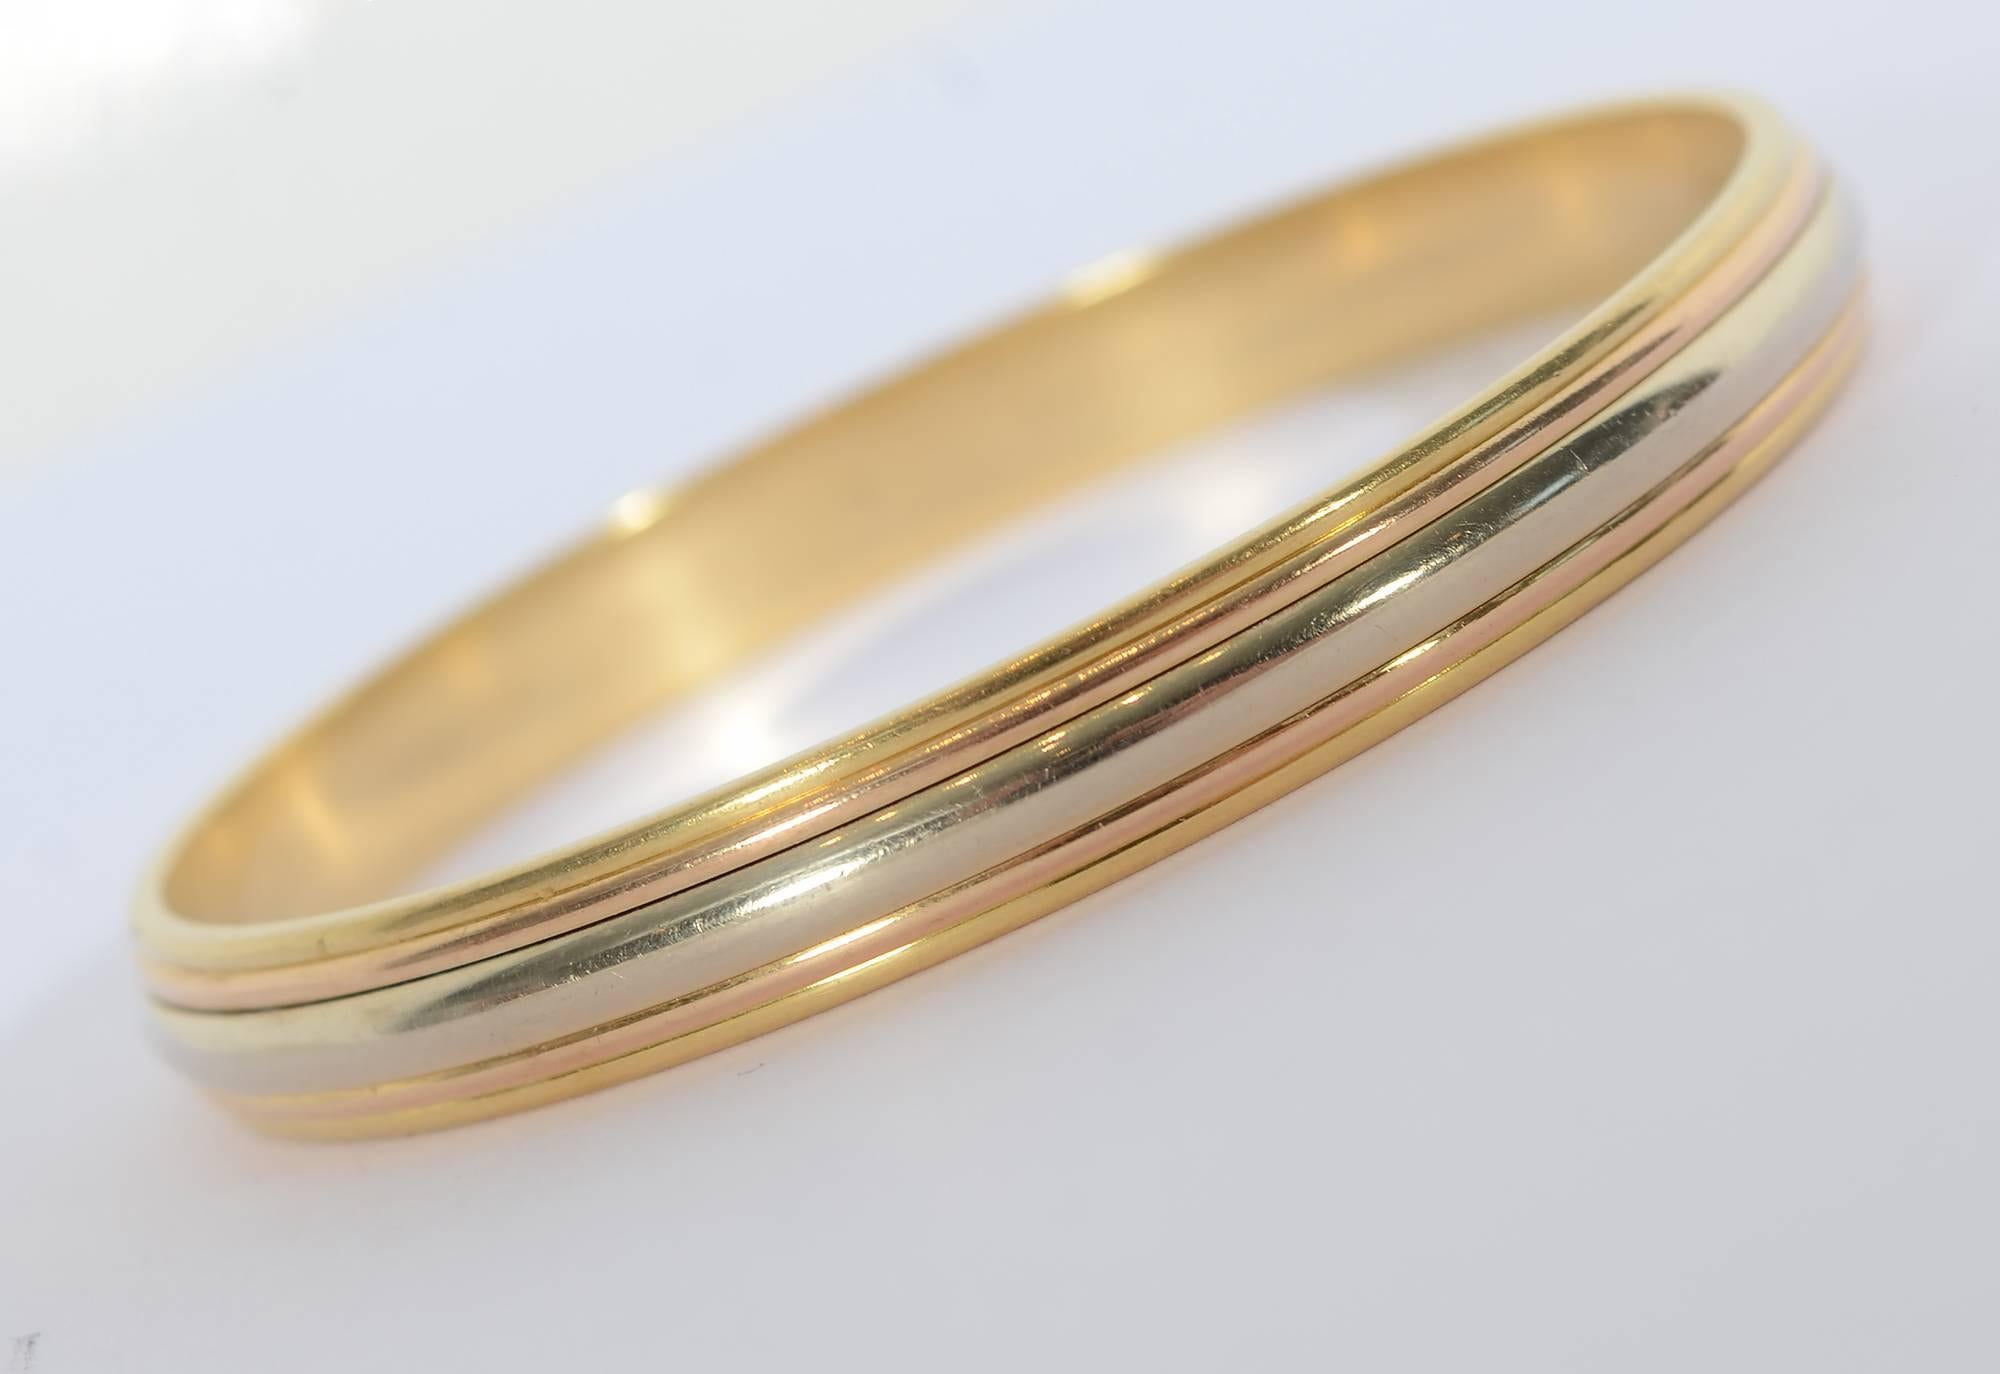 Cartier slip on 18 karat gold bangle bracelet in their signature tricolor gold. The pink gold is meant to represent love; the yellow for fidelity and the white for friendship. This lovely bangle bracelet measures 5/16